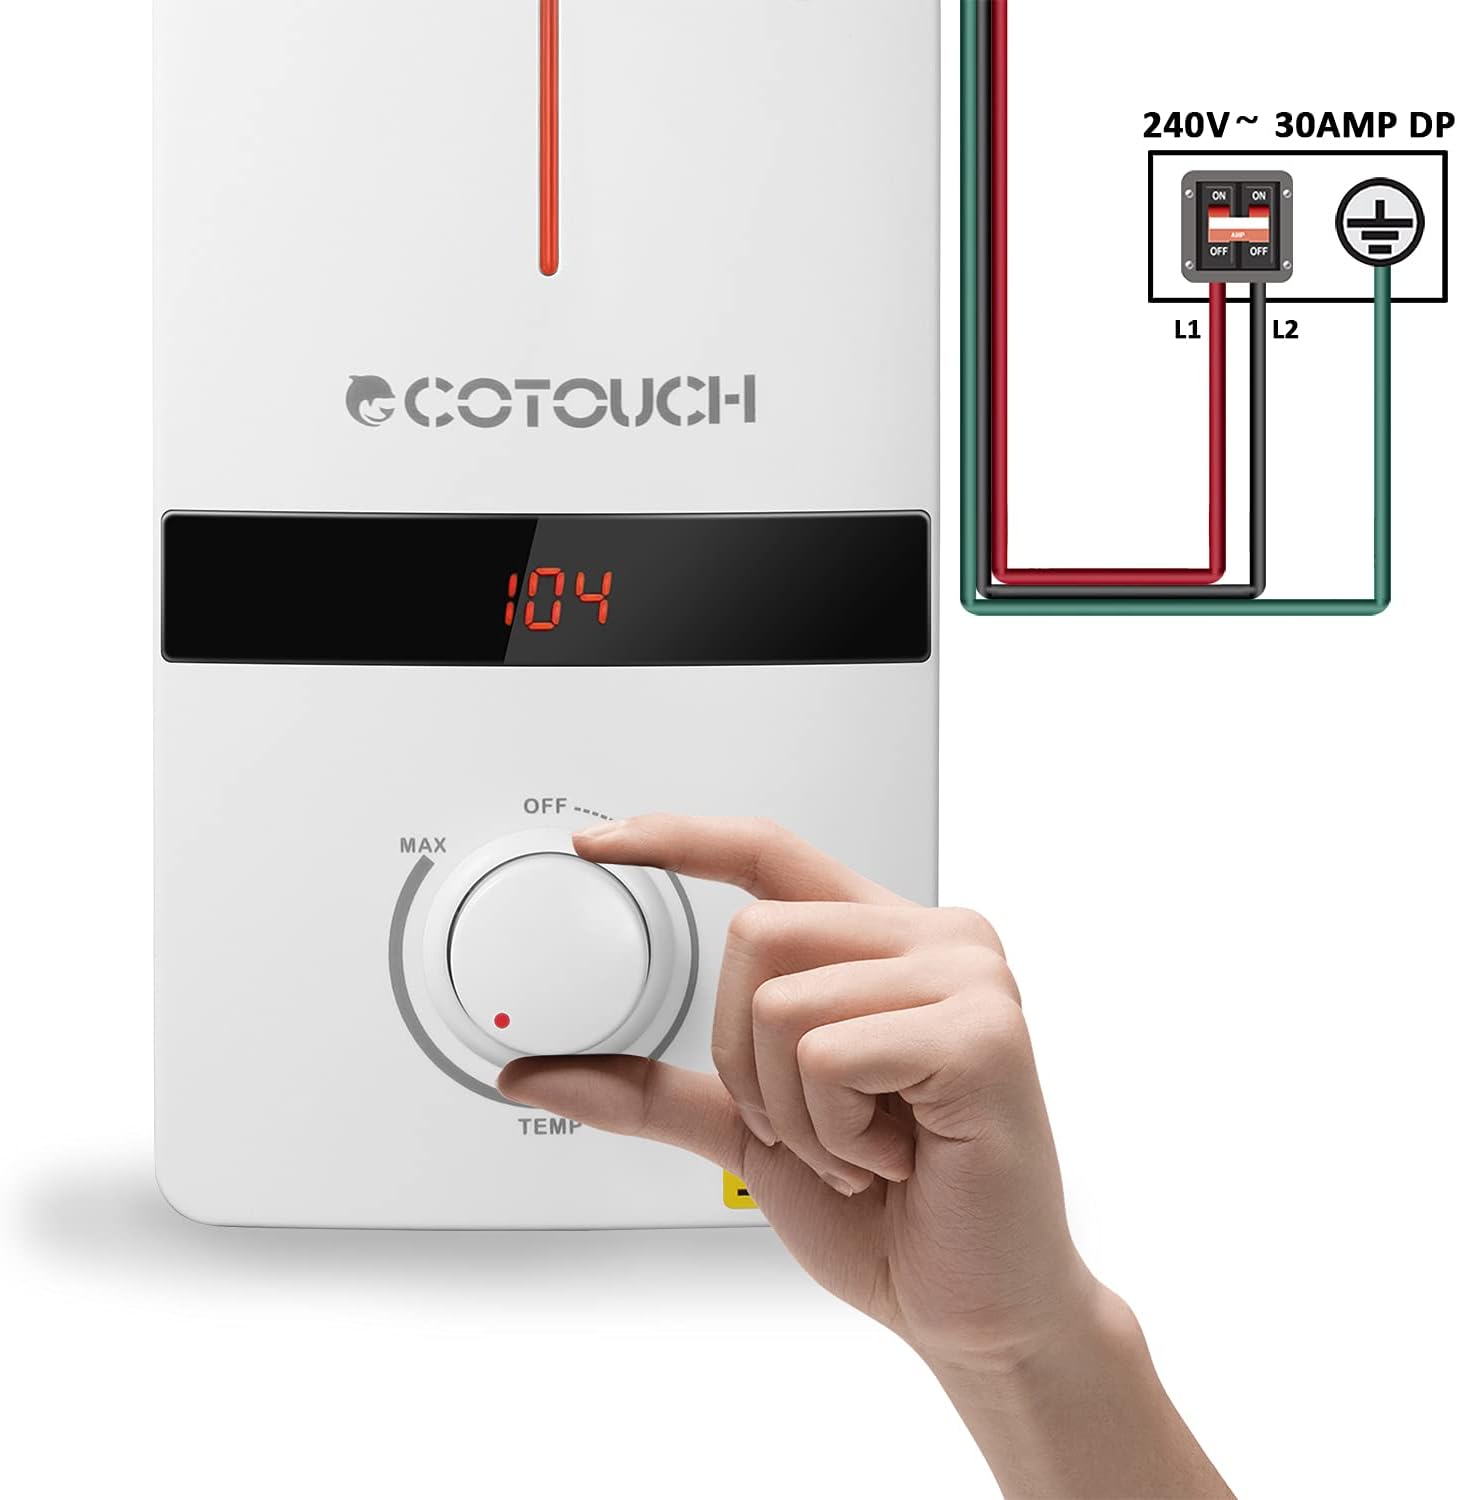 ECOTOUCH Smart Mini Water Heater Self-Modulating Instant Hot Water Heater For Sink Point of Use Water Heater White Tankless Water Heater Electric 5.5kW 240V